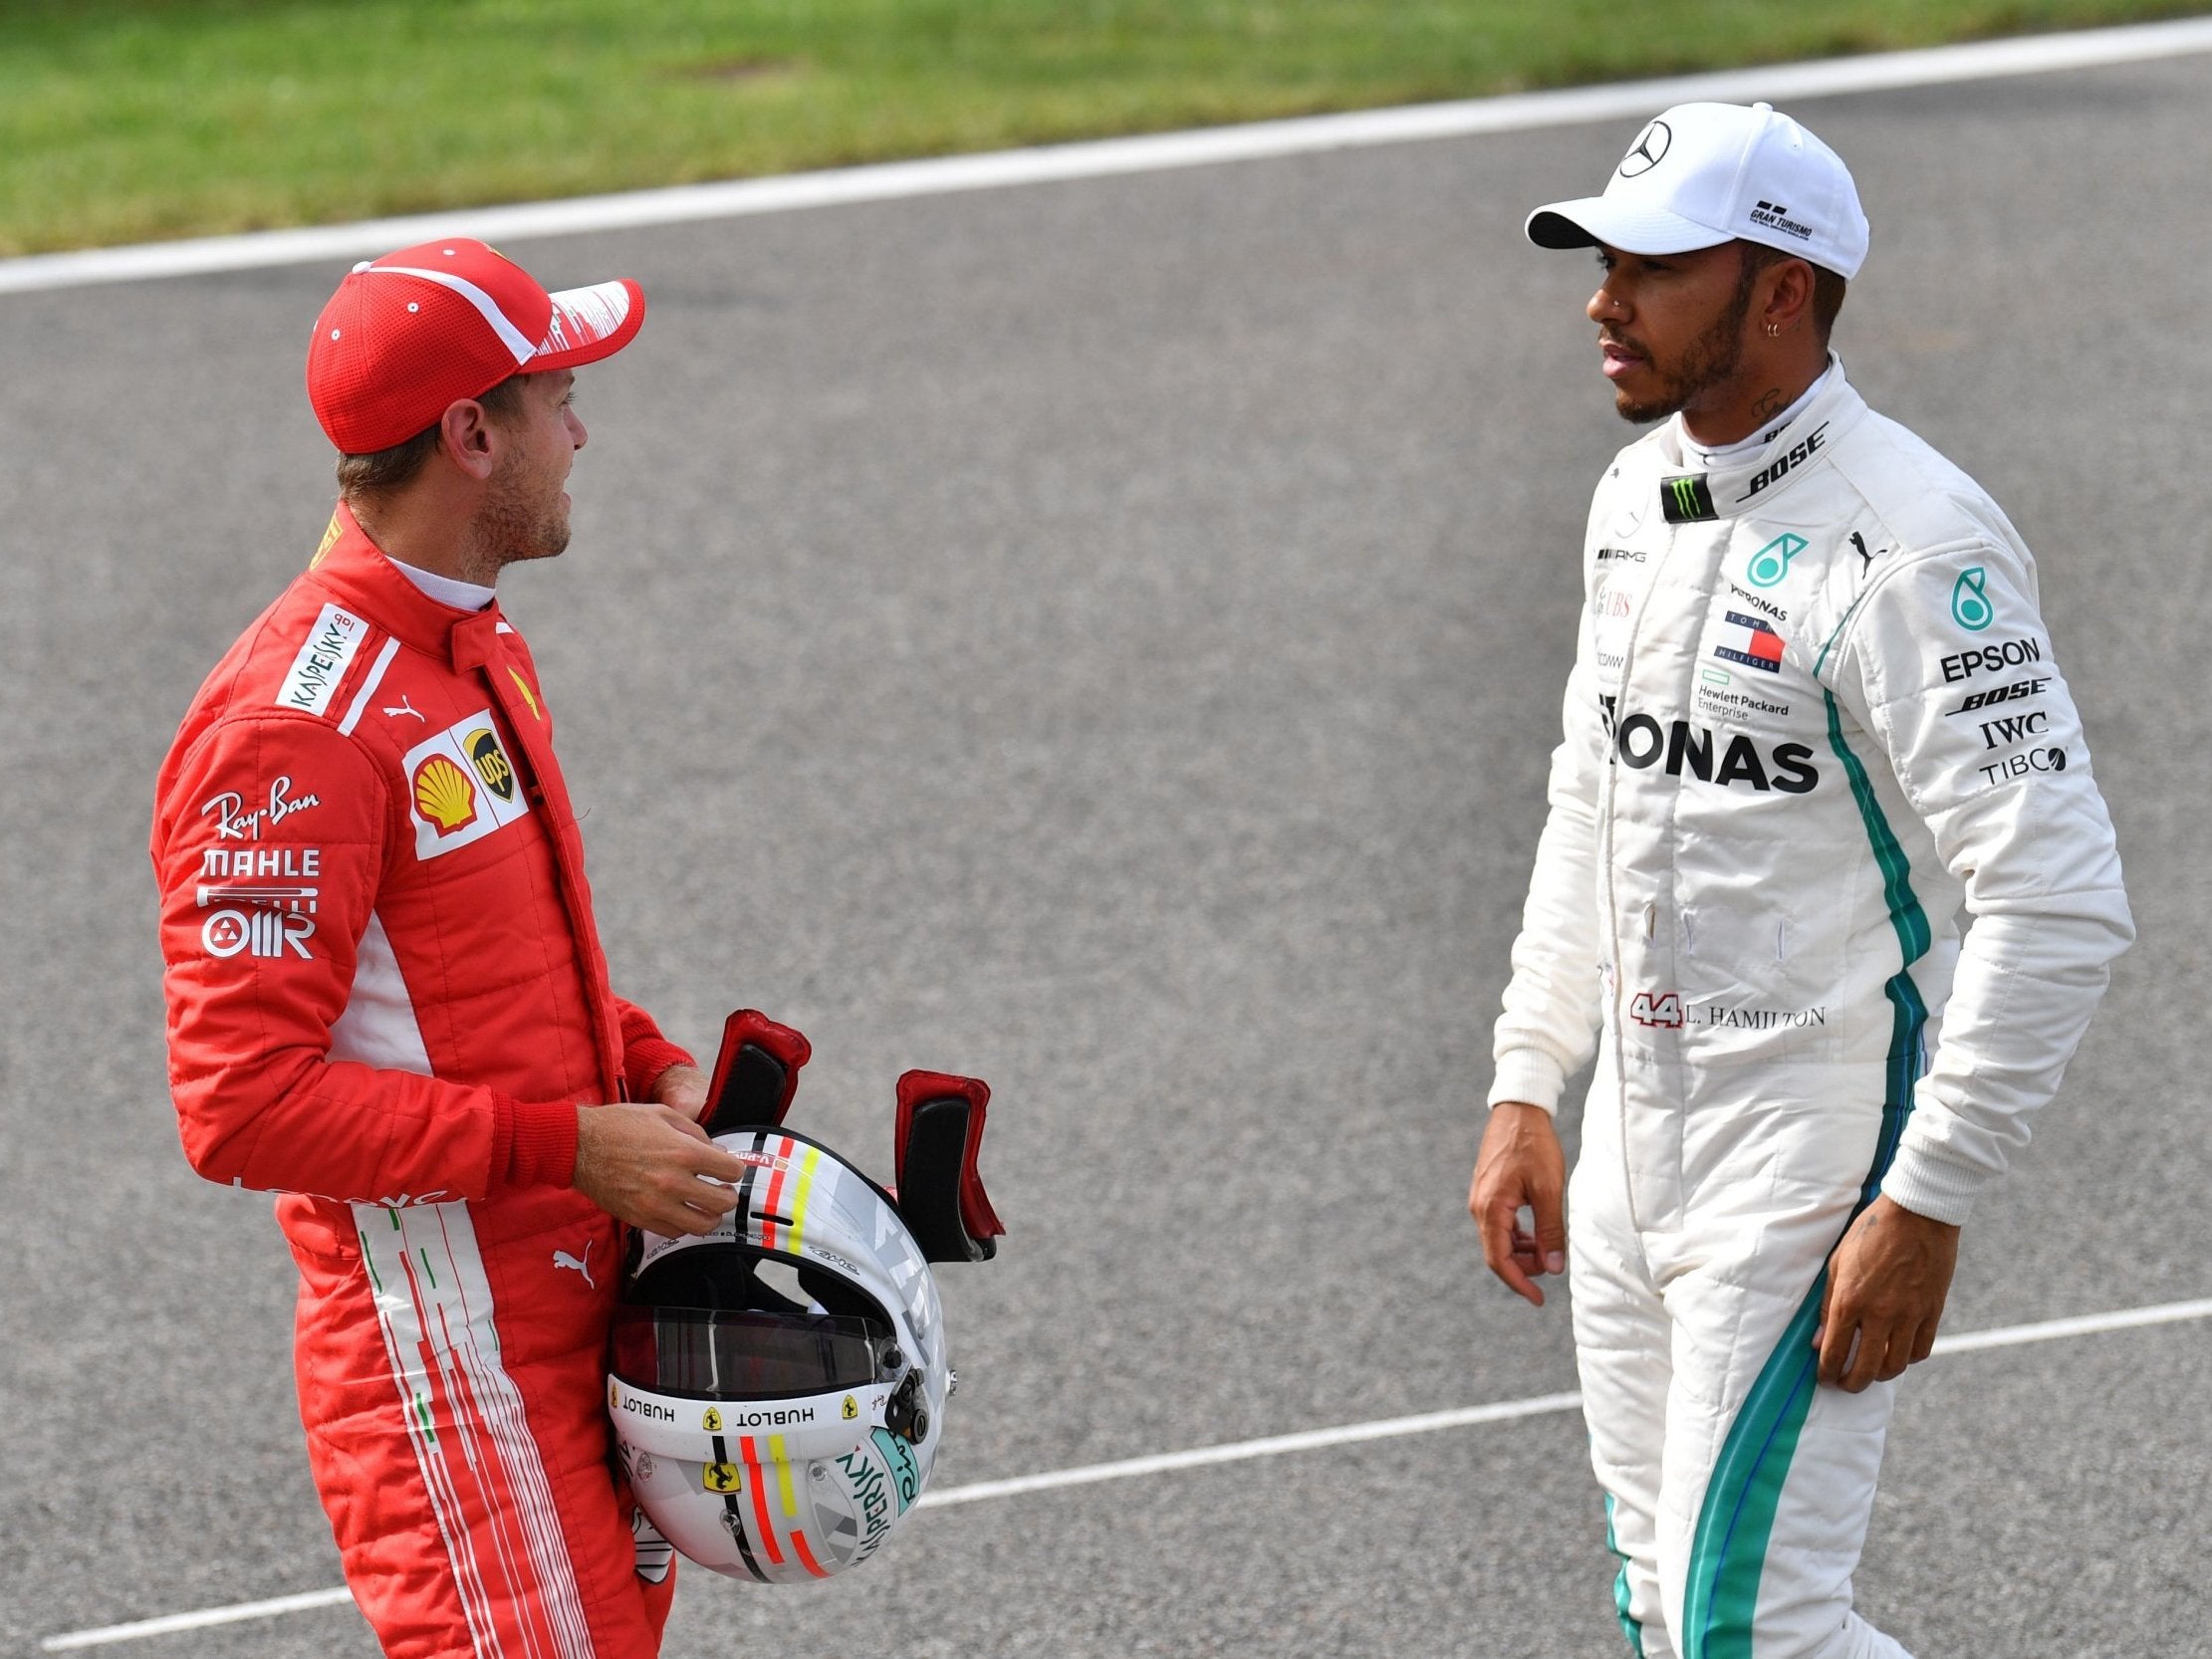 Hamilton stretched his championship lead to 30 points over Vettel (AFP/Getty)